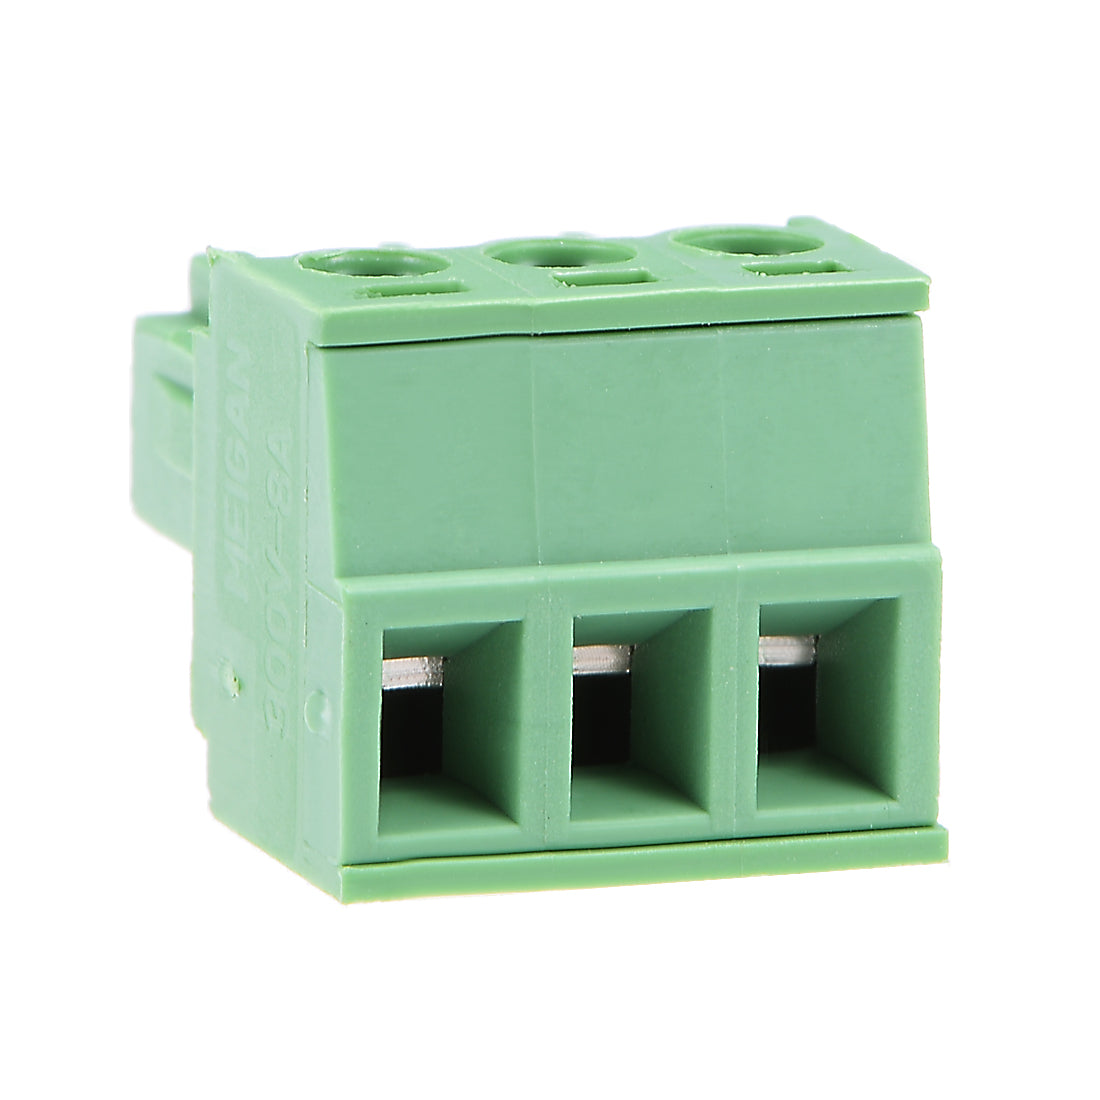 uxcell Uxcell 5Pcs AC300V 8A 3.81mm Pitch 3P Flat Angle Needle Seat Insert-In PCB Terminal Block Connector green